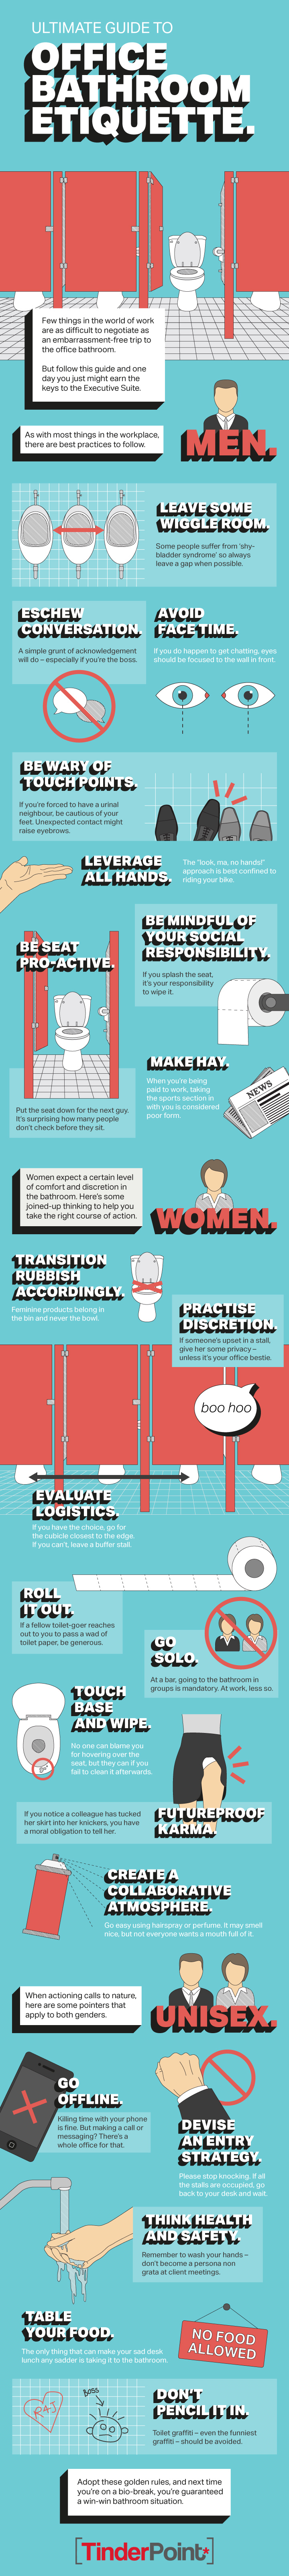 The Ultimate Guide to Office Bathroom Etiquette